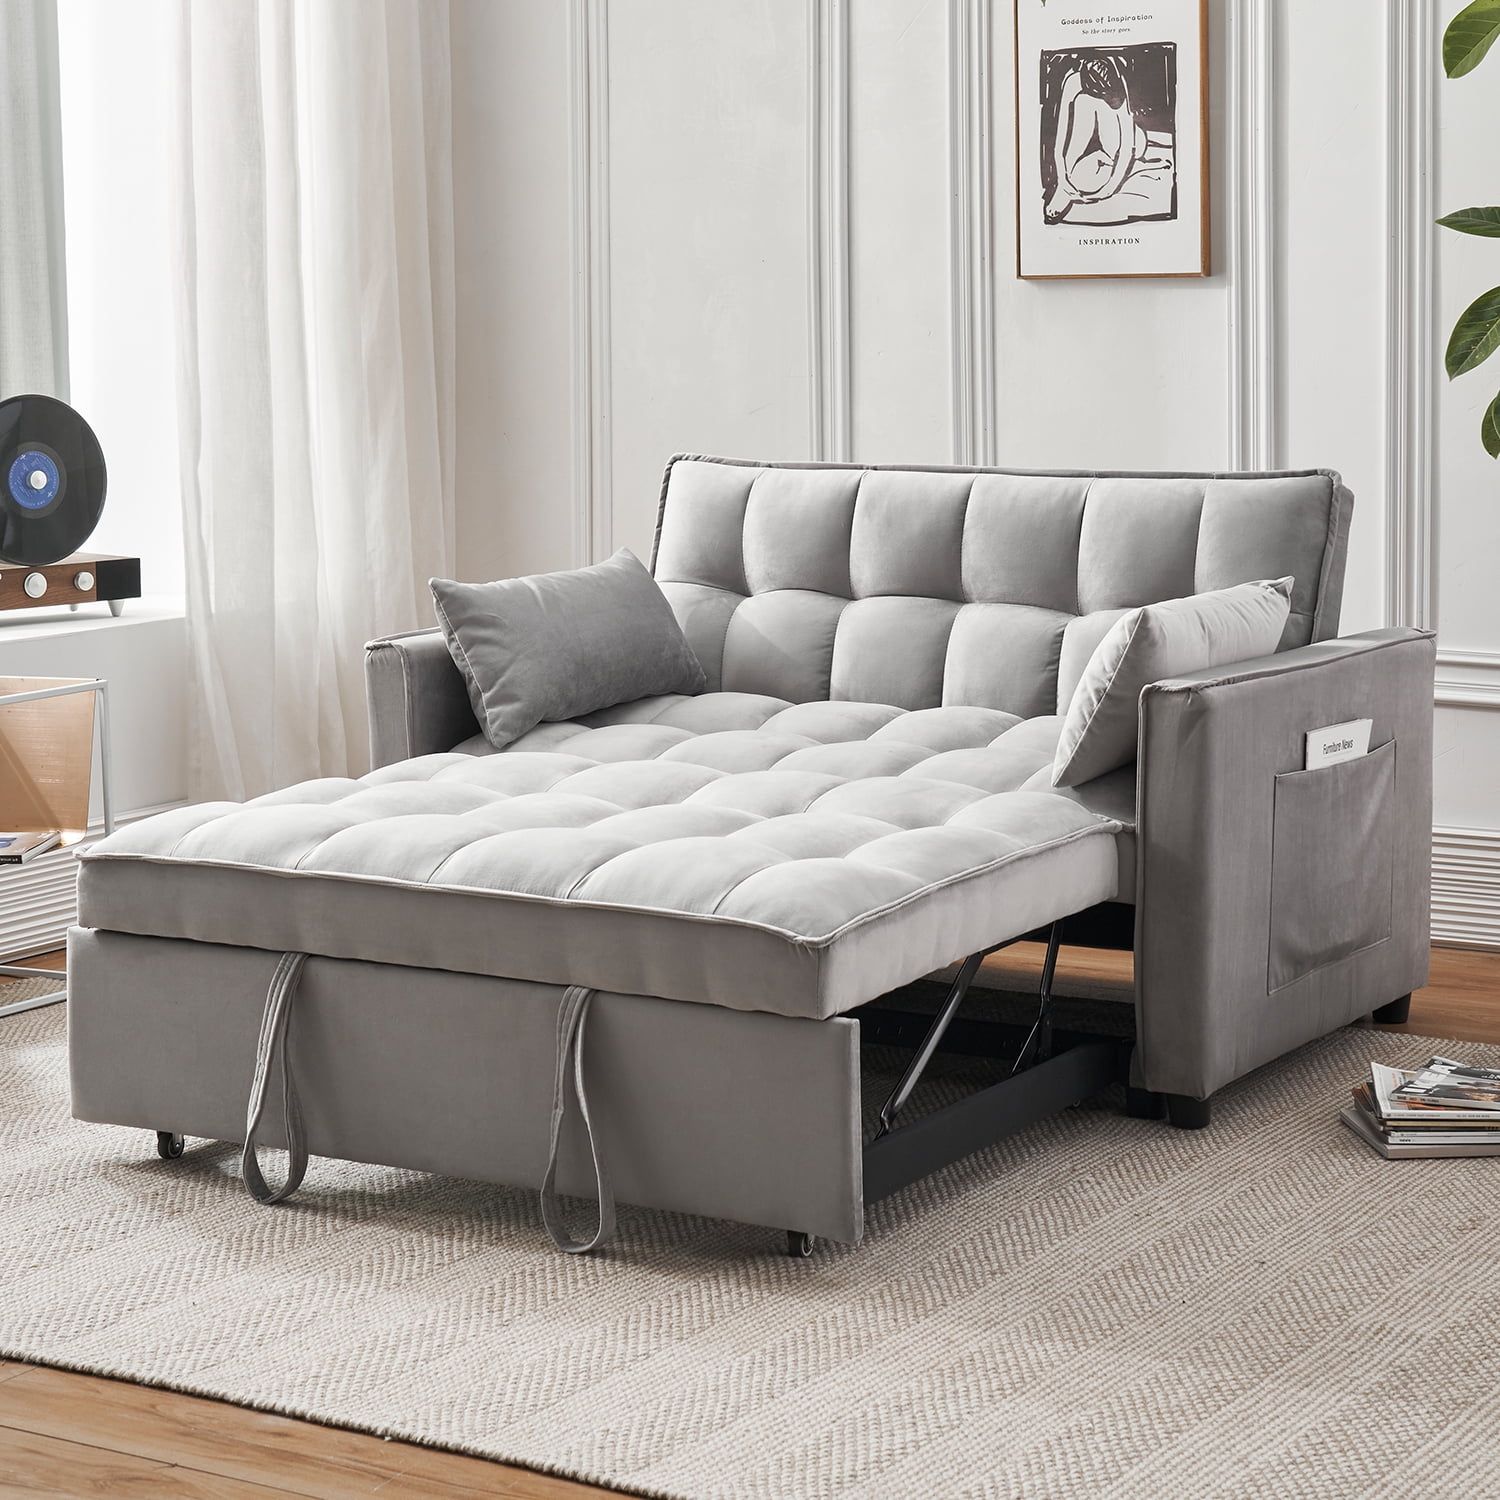 Tzicr 55.5'' 3 In 1 Convertible Sleeper Sofa Bed, Modern Velvet Loveseat  Futon Couch Pullout Bed With Adjustable Backrest, Side Storage Pockets And  Pillows. (grey) – Walmart With 3 In 1 Gray Pull Out Sleeper Sofas (Photo 14 of 15)